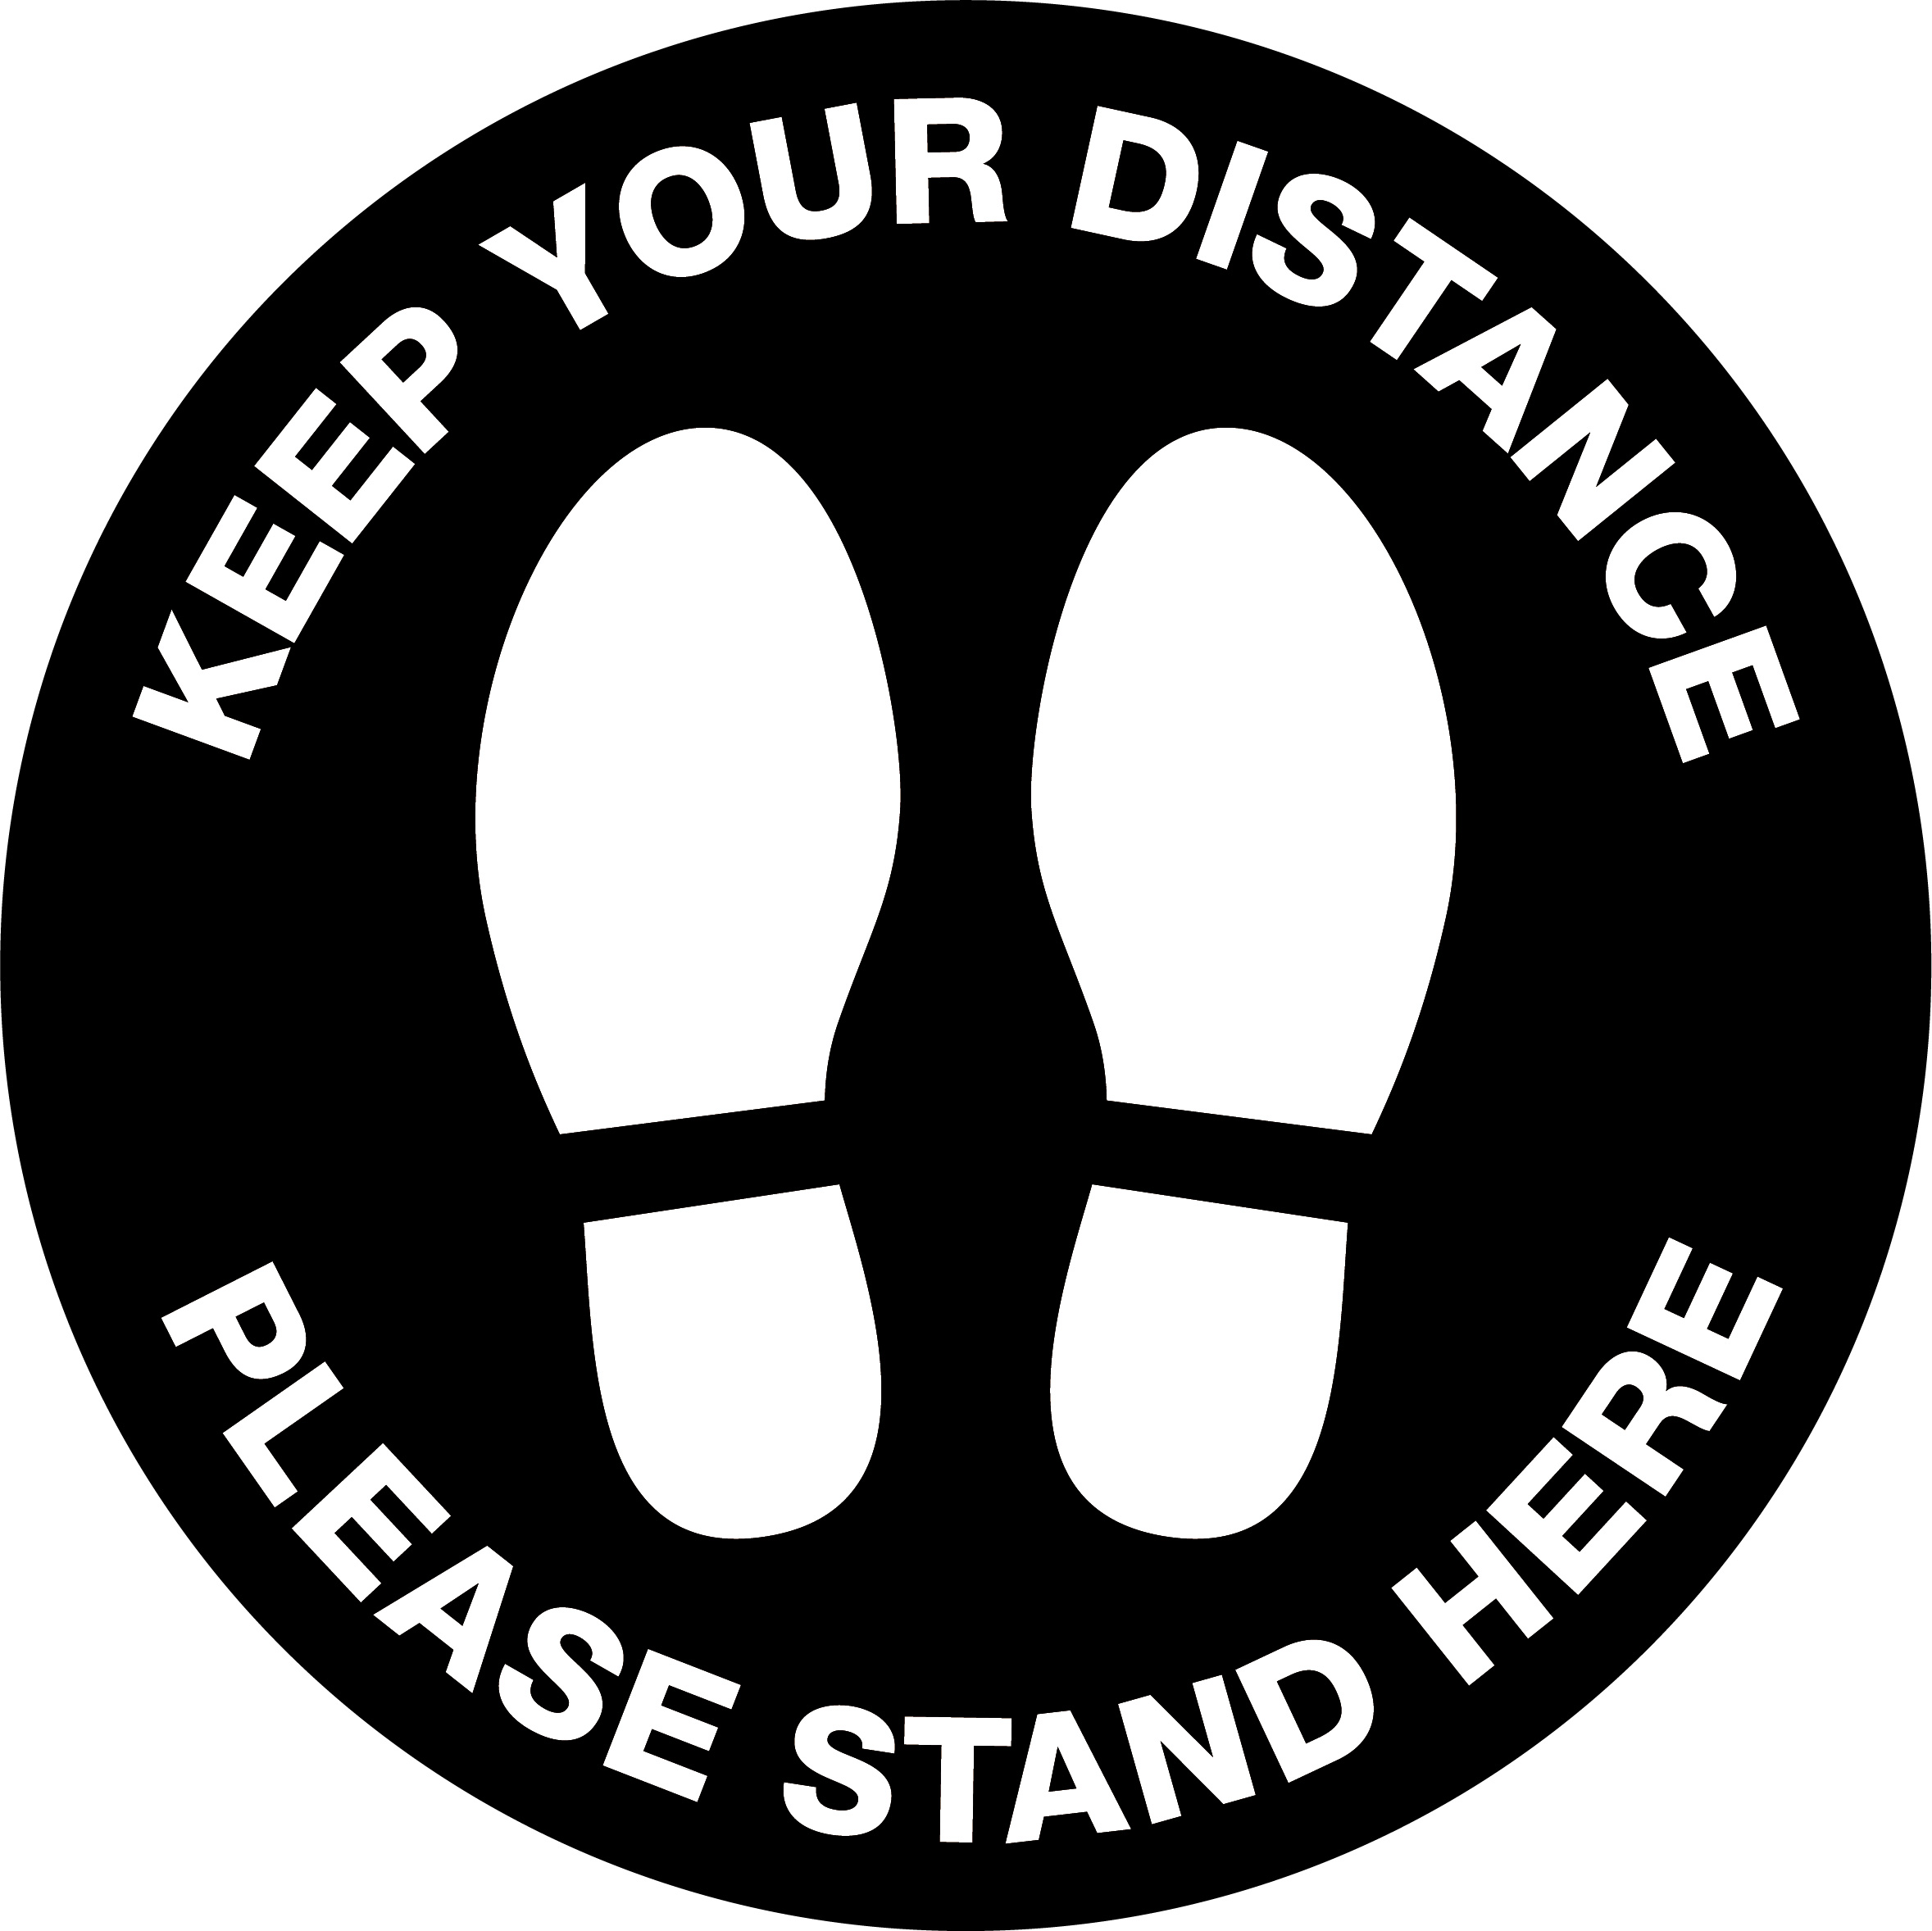 400MM DIA - ANTI SLIP FLOOR GRAPHICS - KEEP YOUR DISTANCE FEET PICTURE